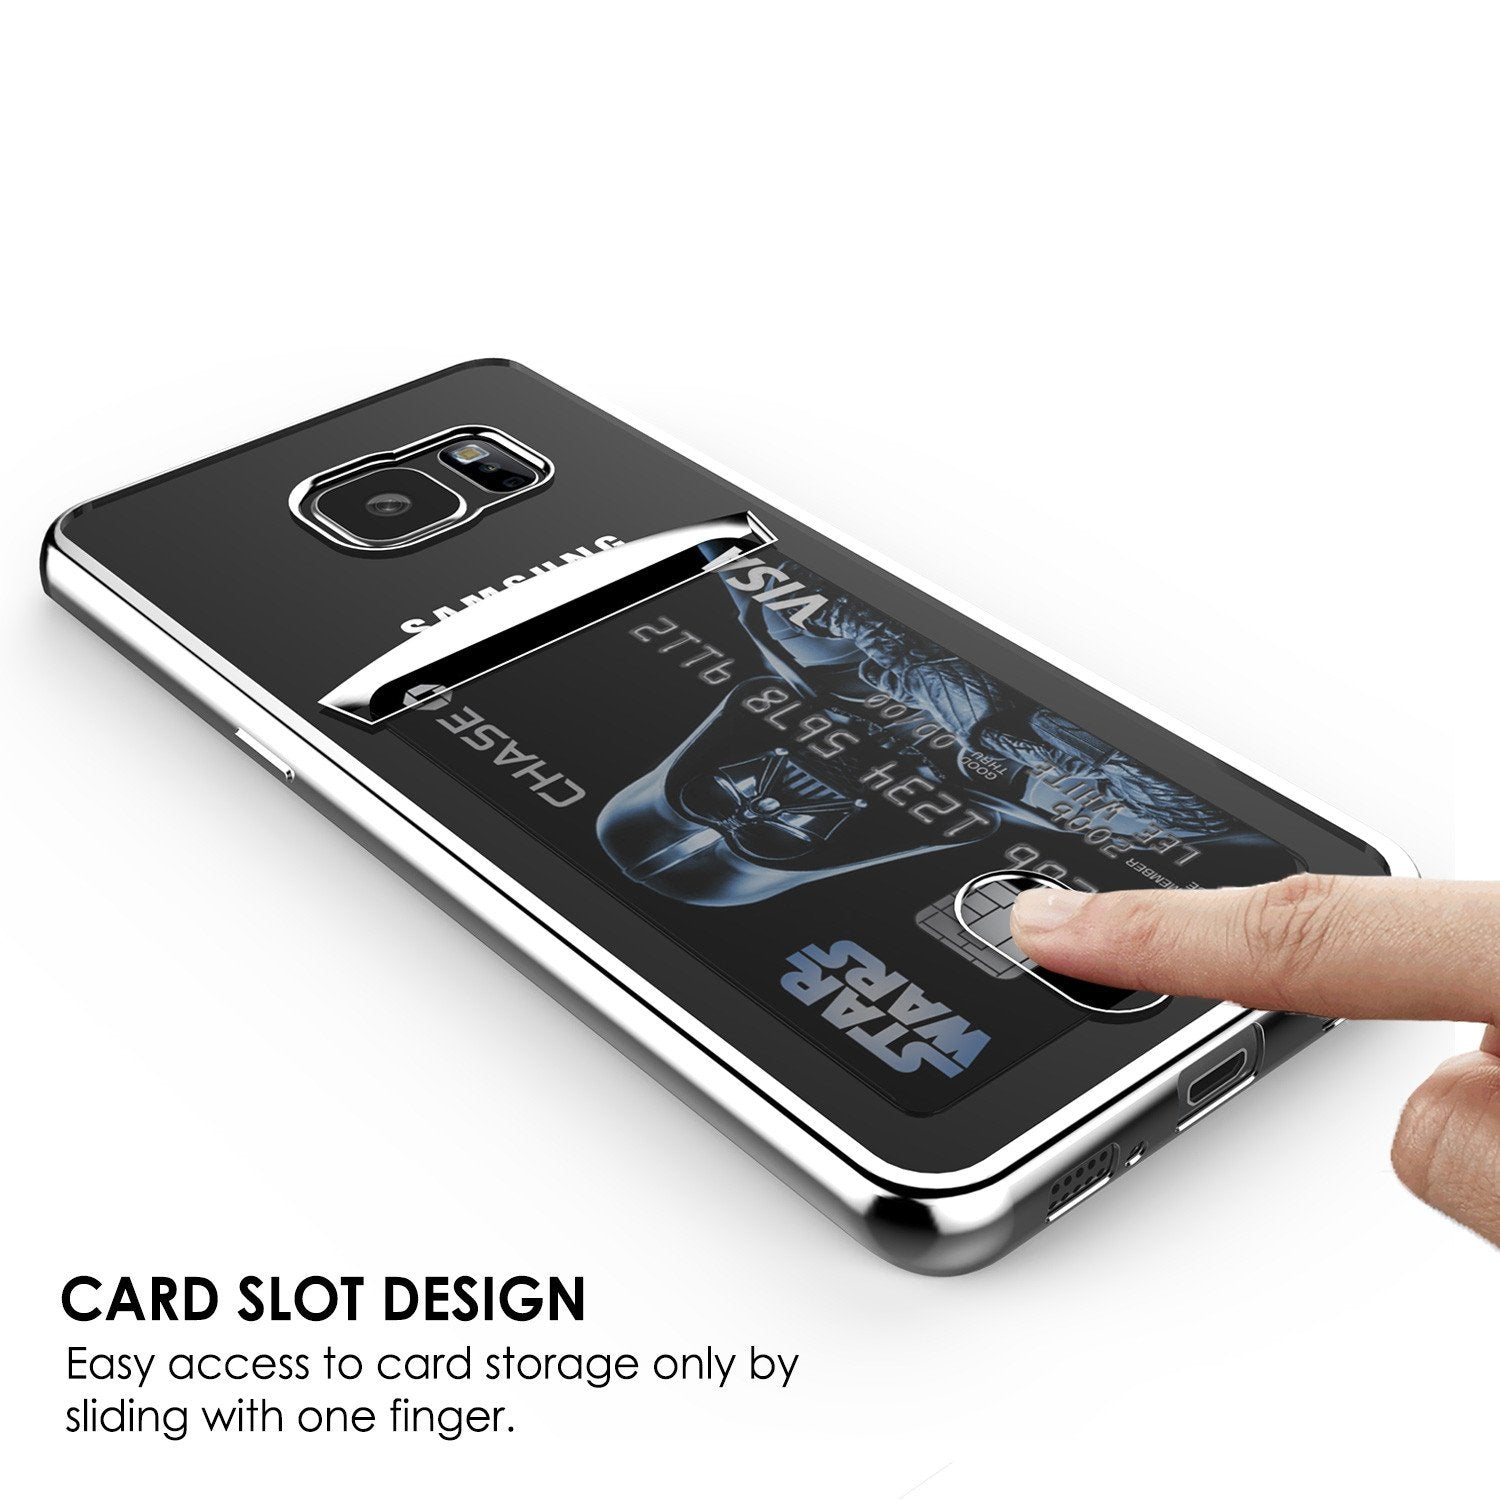 Galaxy S6 EDGE Case, PUNKCASE® LUCID Silver Series | Card Slot | SHIELD Screen Protector | Ultra fit